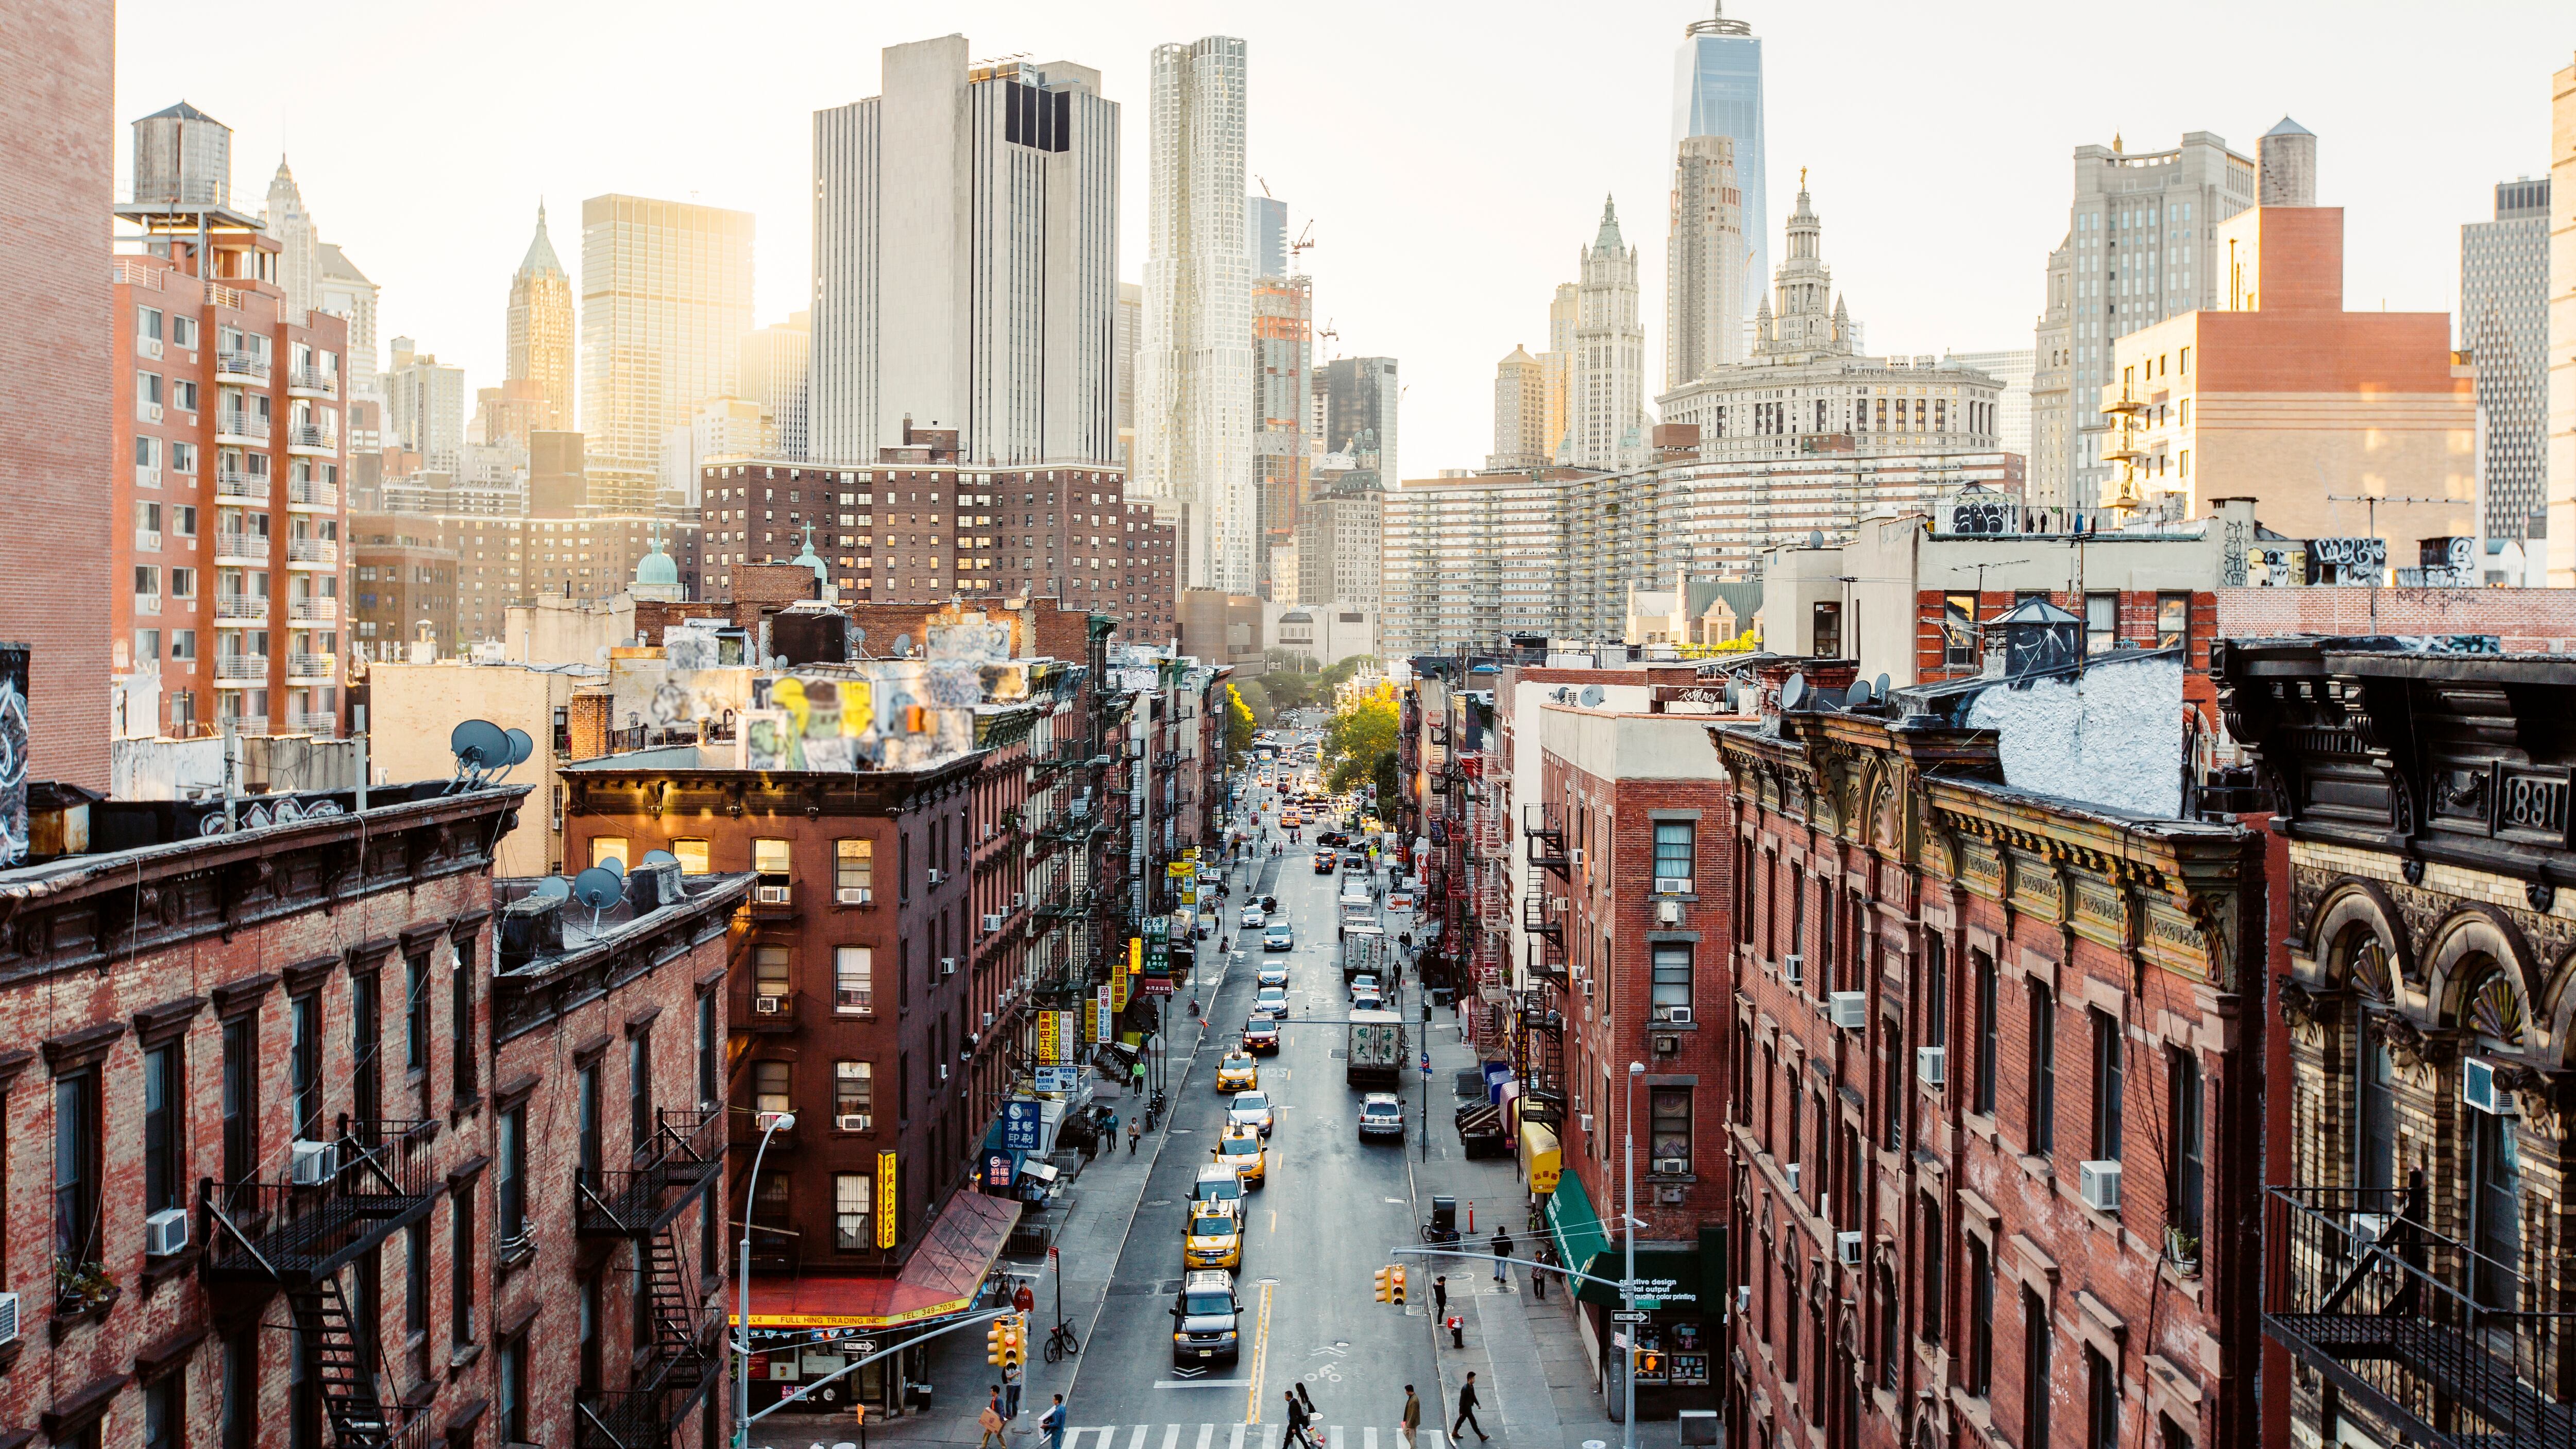 A view of the Lower East Side of Manhattan in New York City.